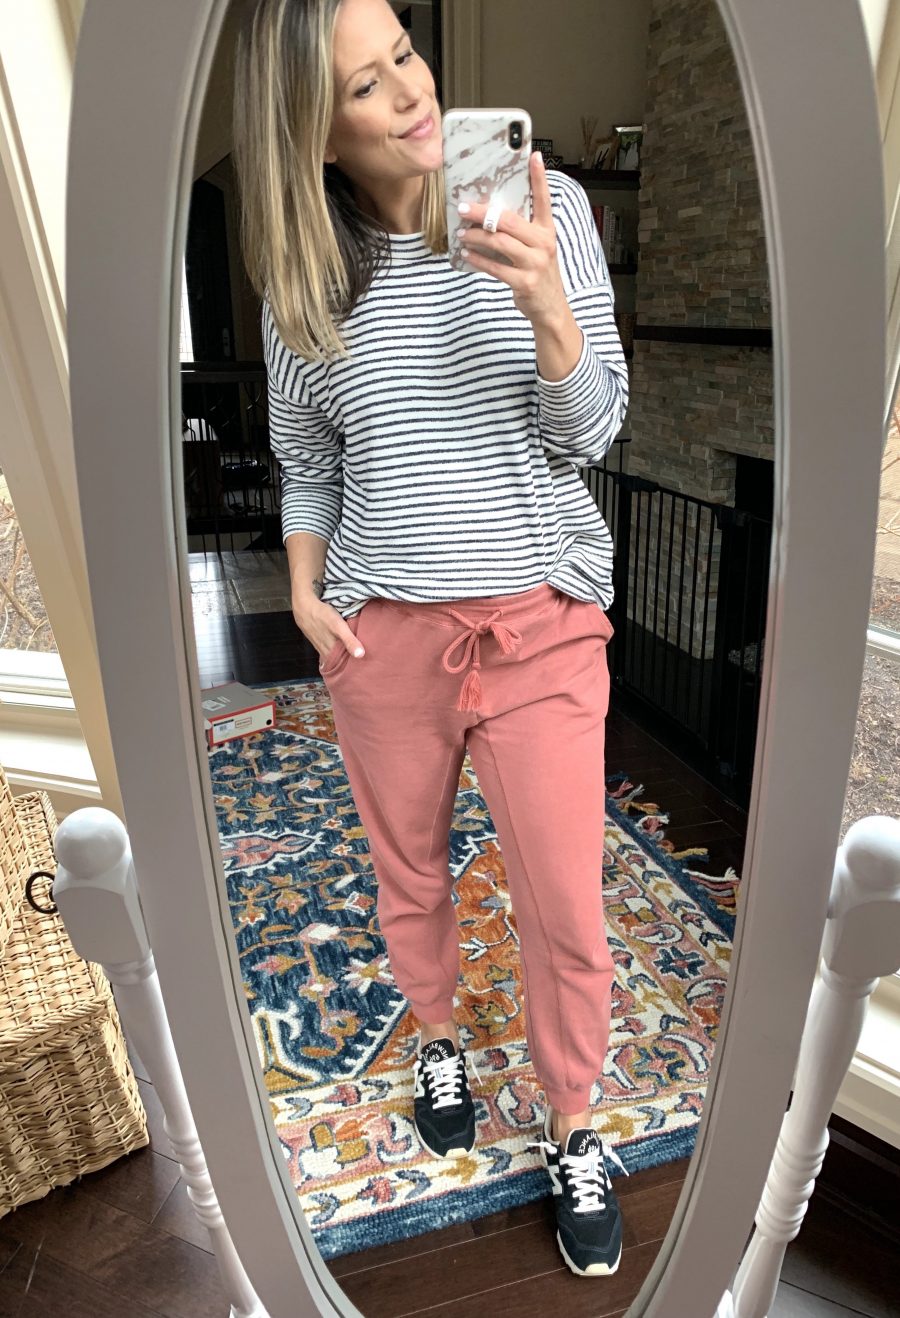 Ten cute and comfortable mom outfits for the girl on the go. These looks are perfect for chasing littles, balancing work, or running around 